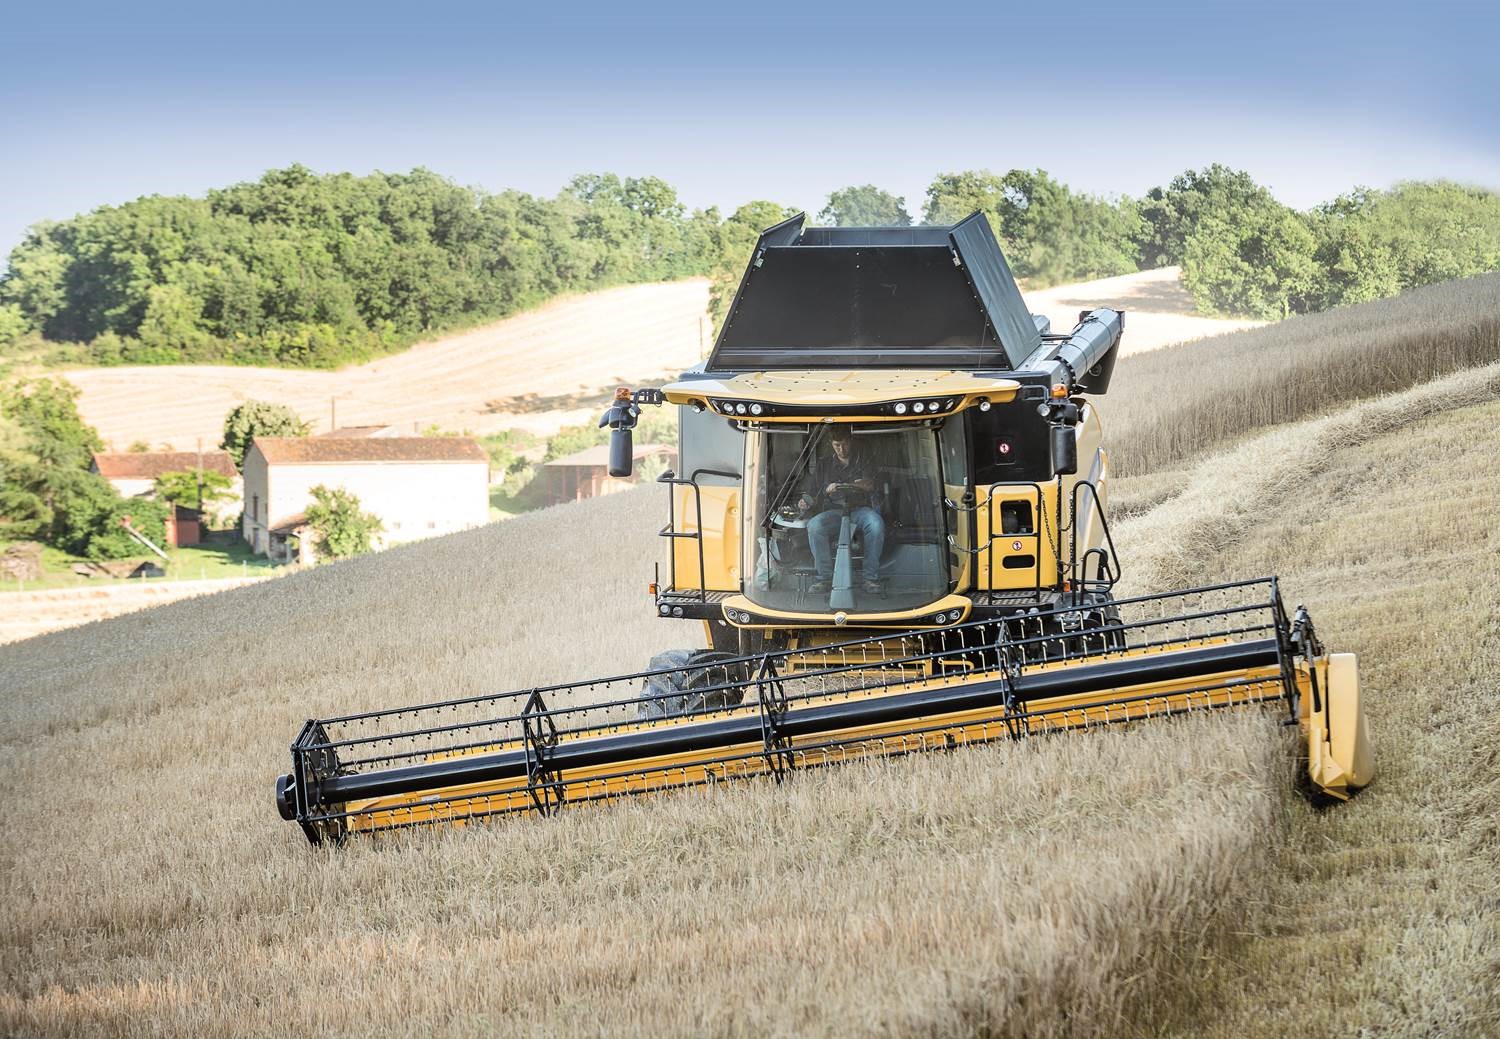 The CX and CR Everest models compensate lateral slopes of up to 20% to maintain a perfect horizontality of the combine